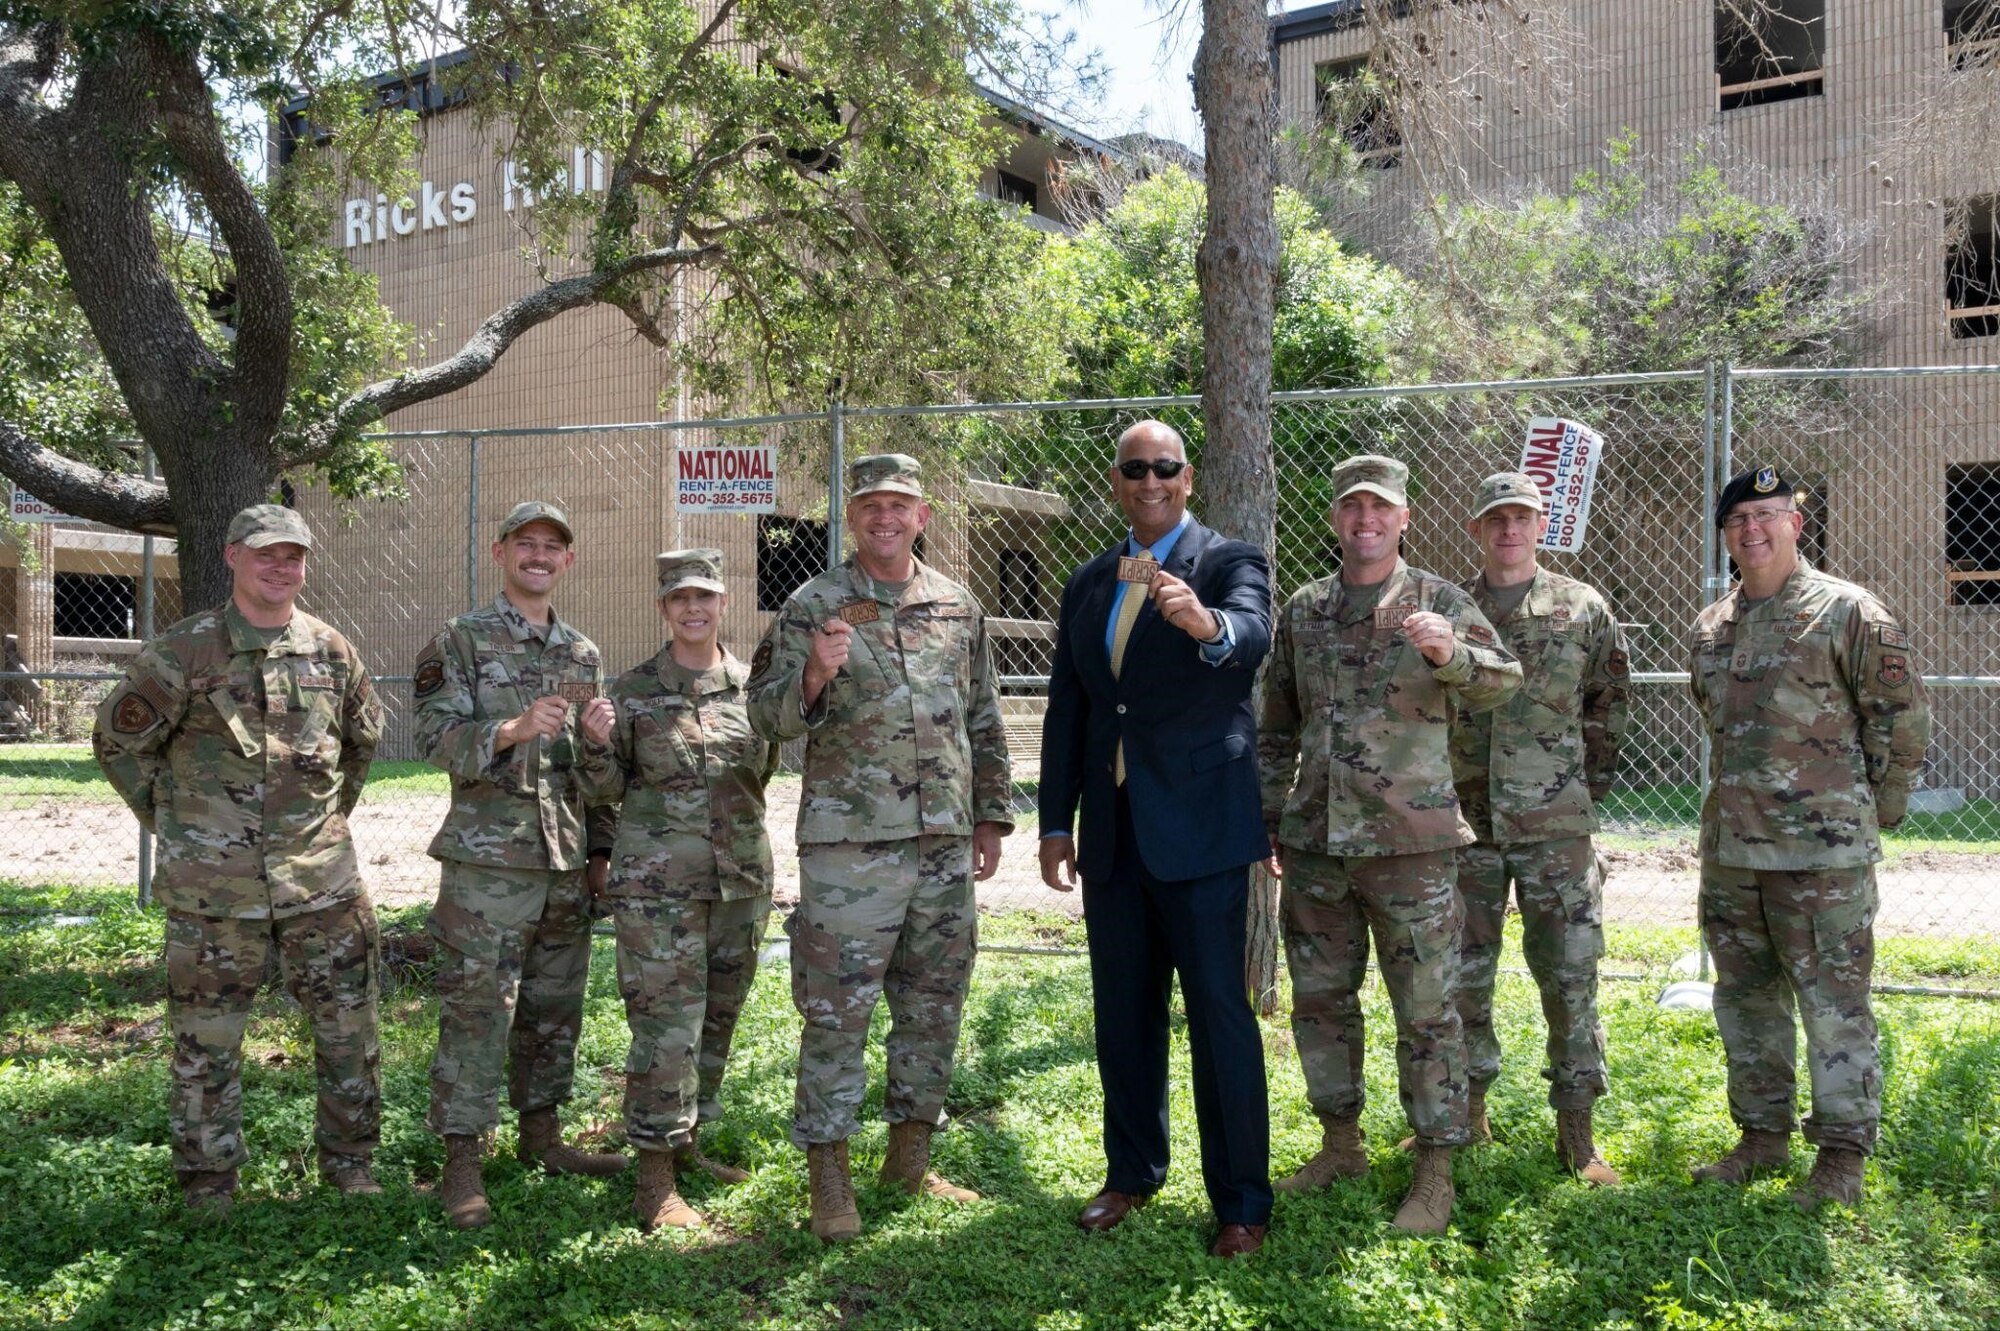 The Hon. Ravi Chaudhary (middle), Assistant Secretary of the Air Force for Energy, Installations, and Environment, stands with leadership members in front of an enlisted dormitory being renovated at Laughlin Air Force Base, Texas, on May 31, 2023. (U.S. Air Force photo by Airman 1st Class Kailee Reynolds)